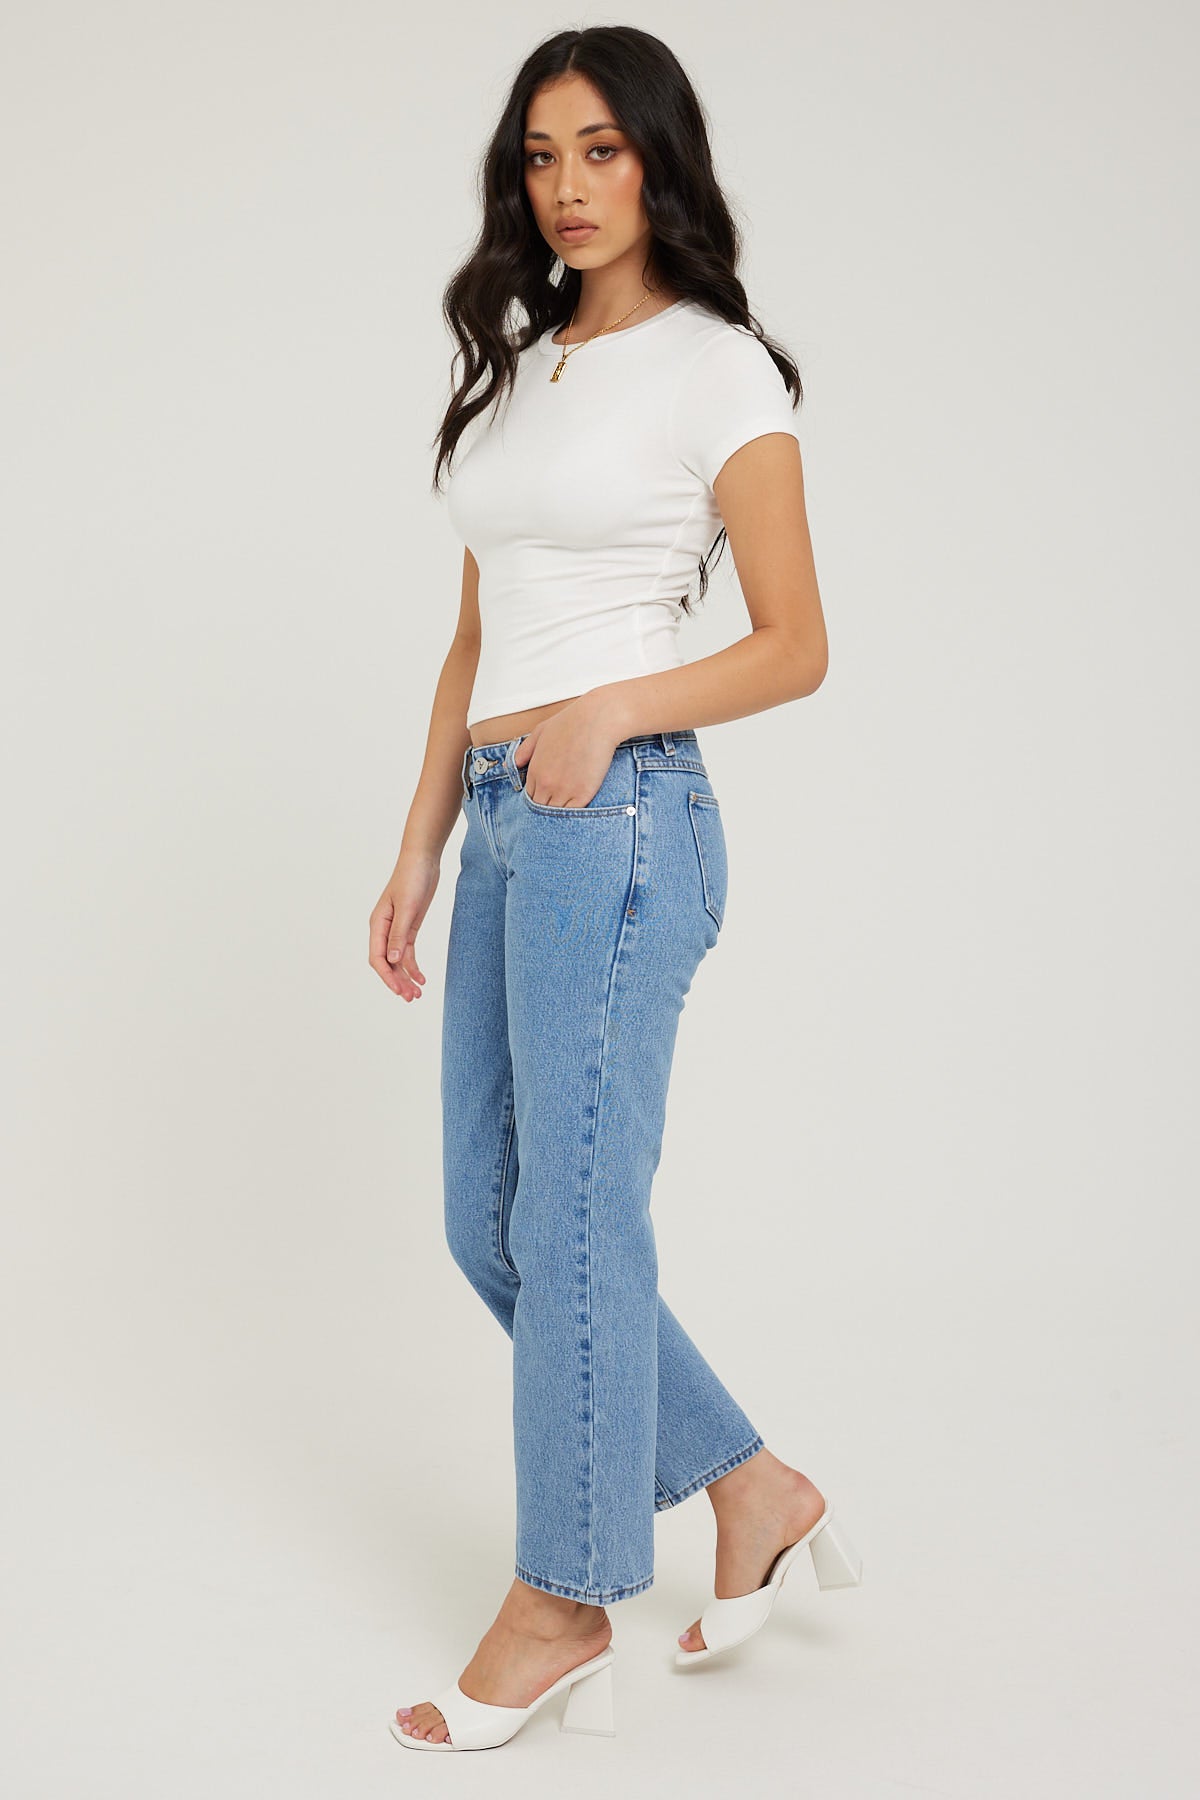 Abrand A 99 Low Straight Petite Katie Organic